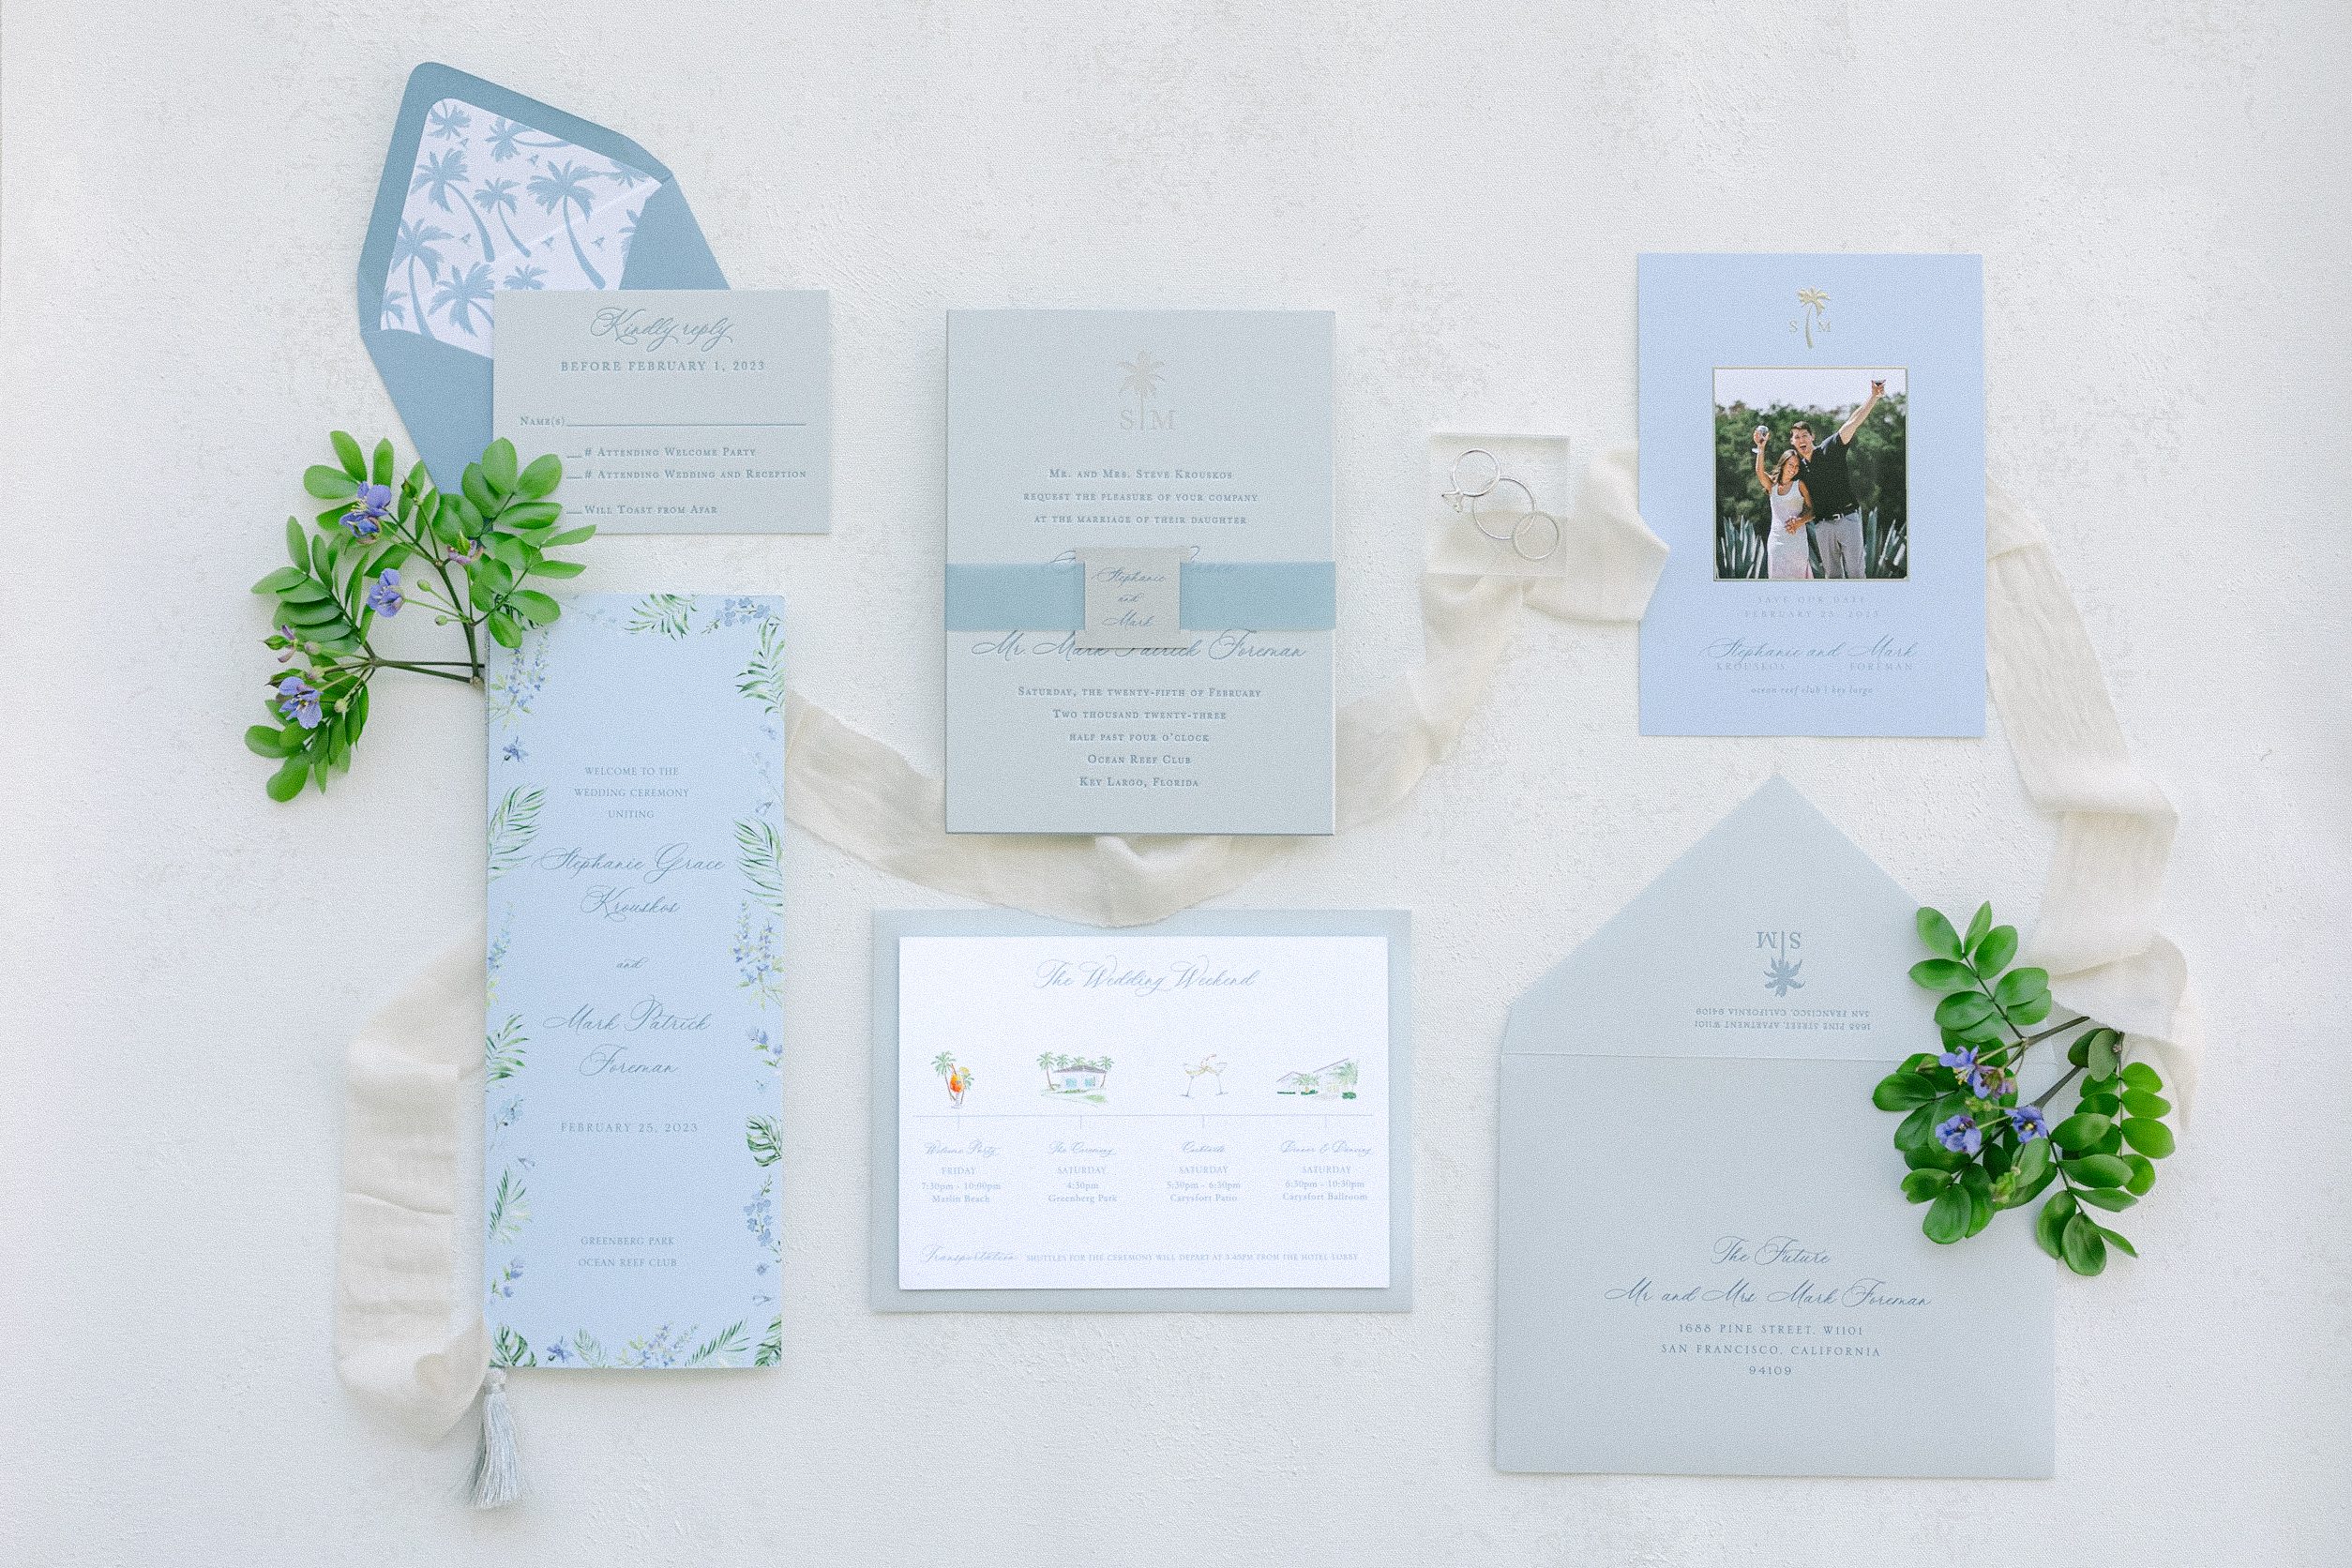 lay flat image of the wedding stationary and some greenery